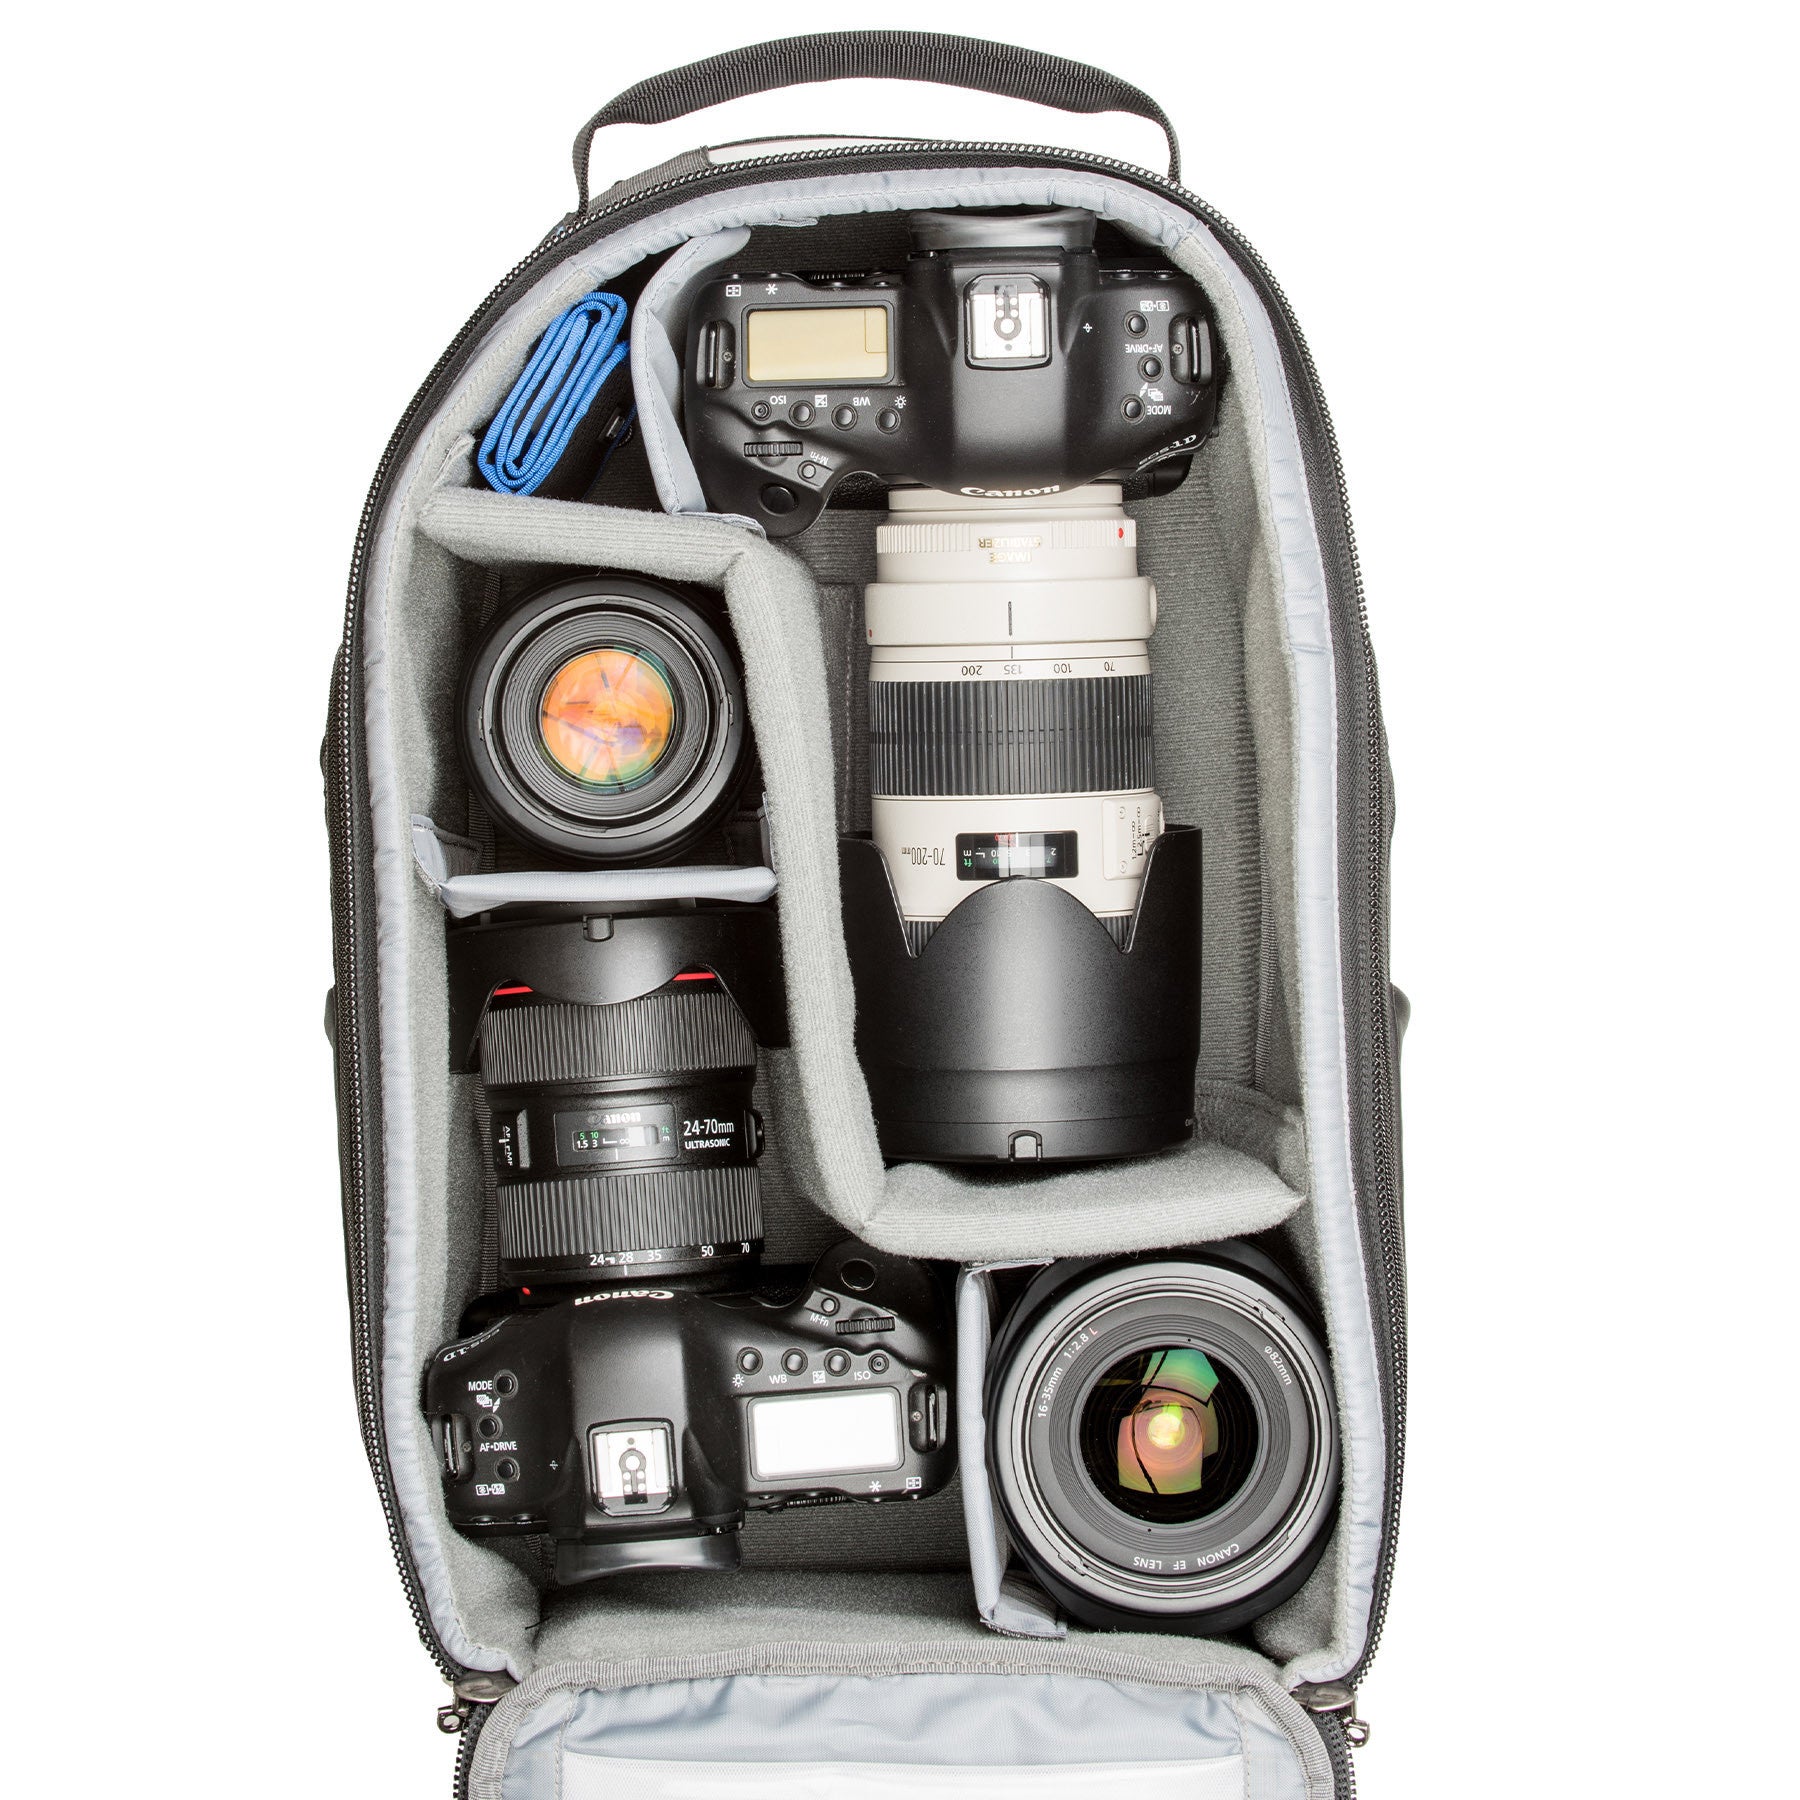 StreetWalker backpacks are designed to accommodate bodies with lenses attached